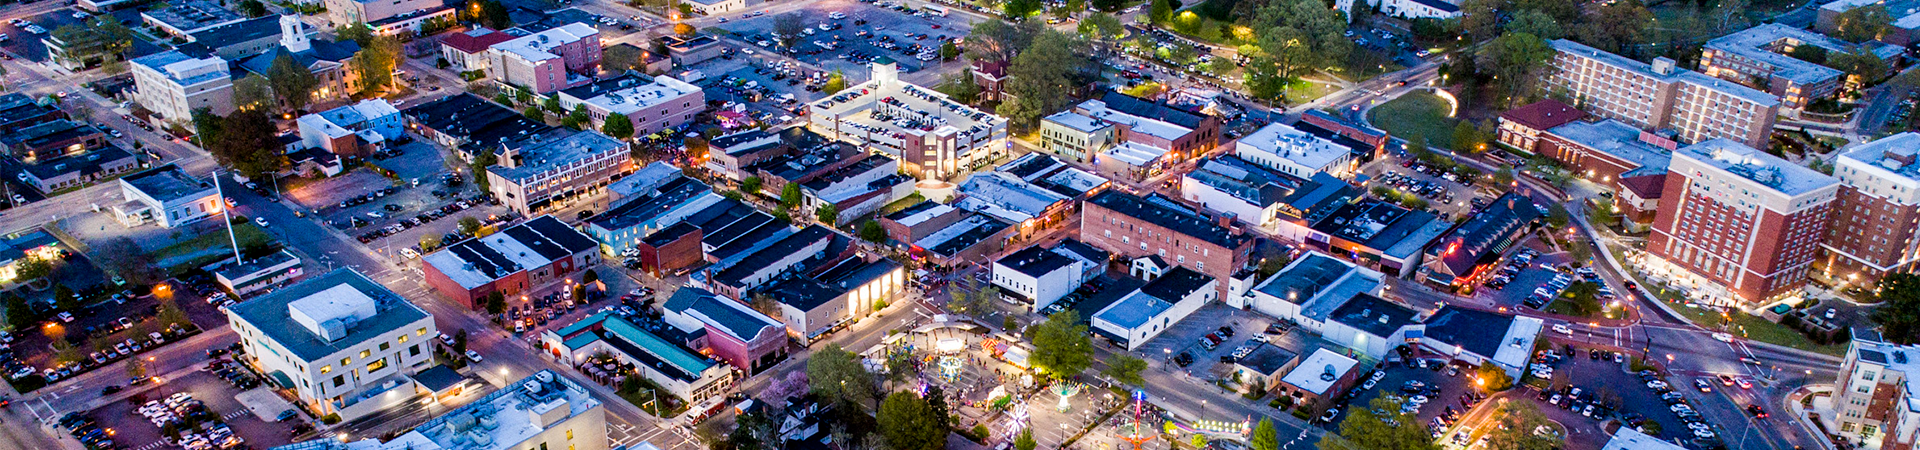 Night aerial view of uptown area